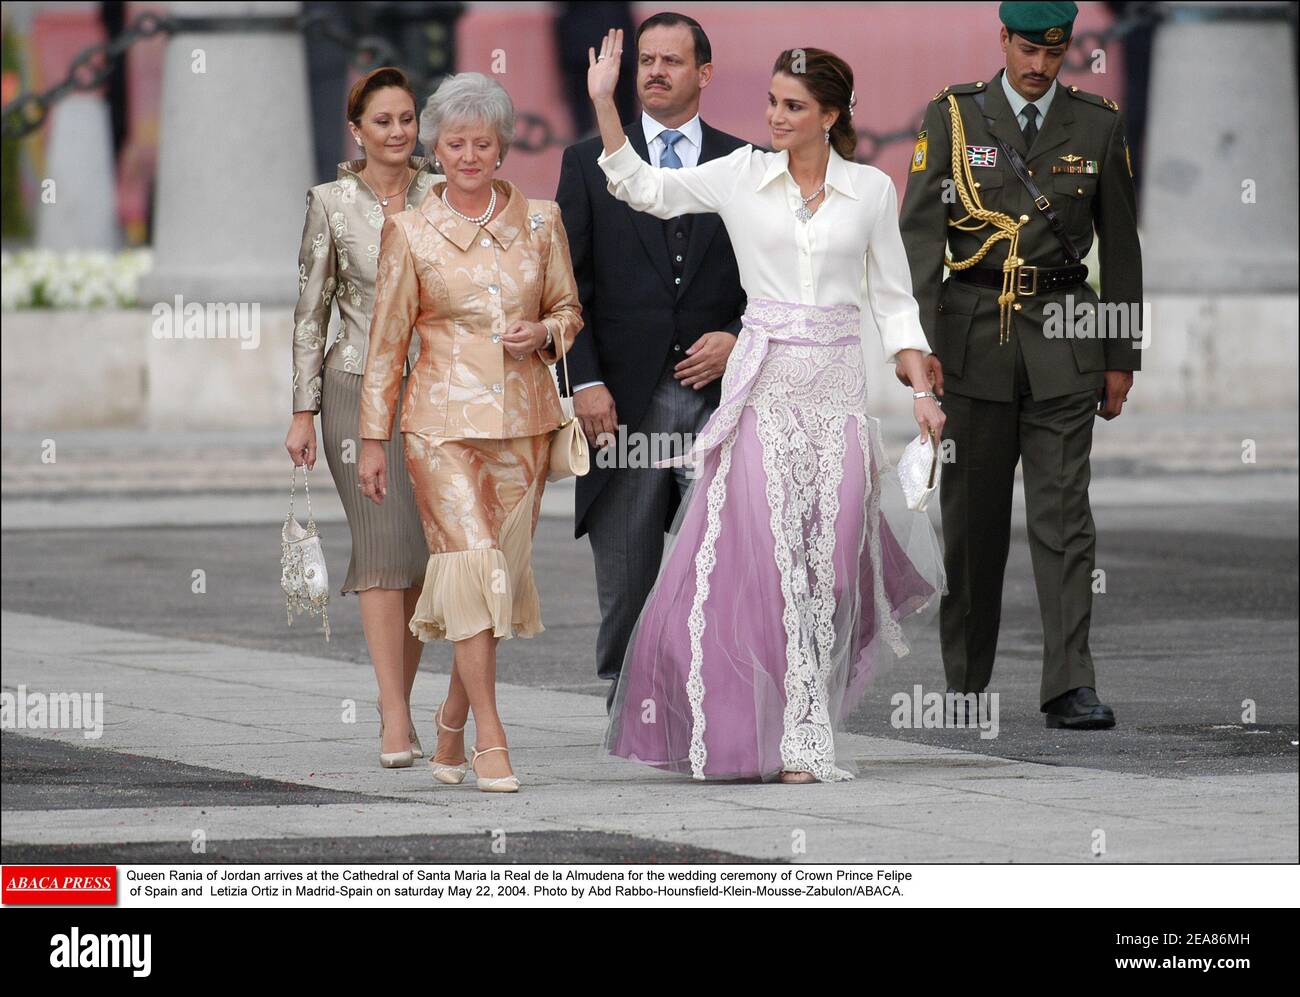 Queen Rania of Jordan and Princess Mona of Jordan arrive at the Cathedral of Santa Maria la Real de la Almudena for the wedding ceremony of Crown Prince Felipe of Spain and Letizia Ortiz in Madrid-Spain on saturday May 22, 2004. Photo by Abd Rabbo-Hounsfield-Klein-Mousse-Zabulon/ABACA. Stock Photo